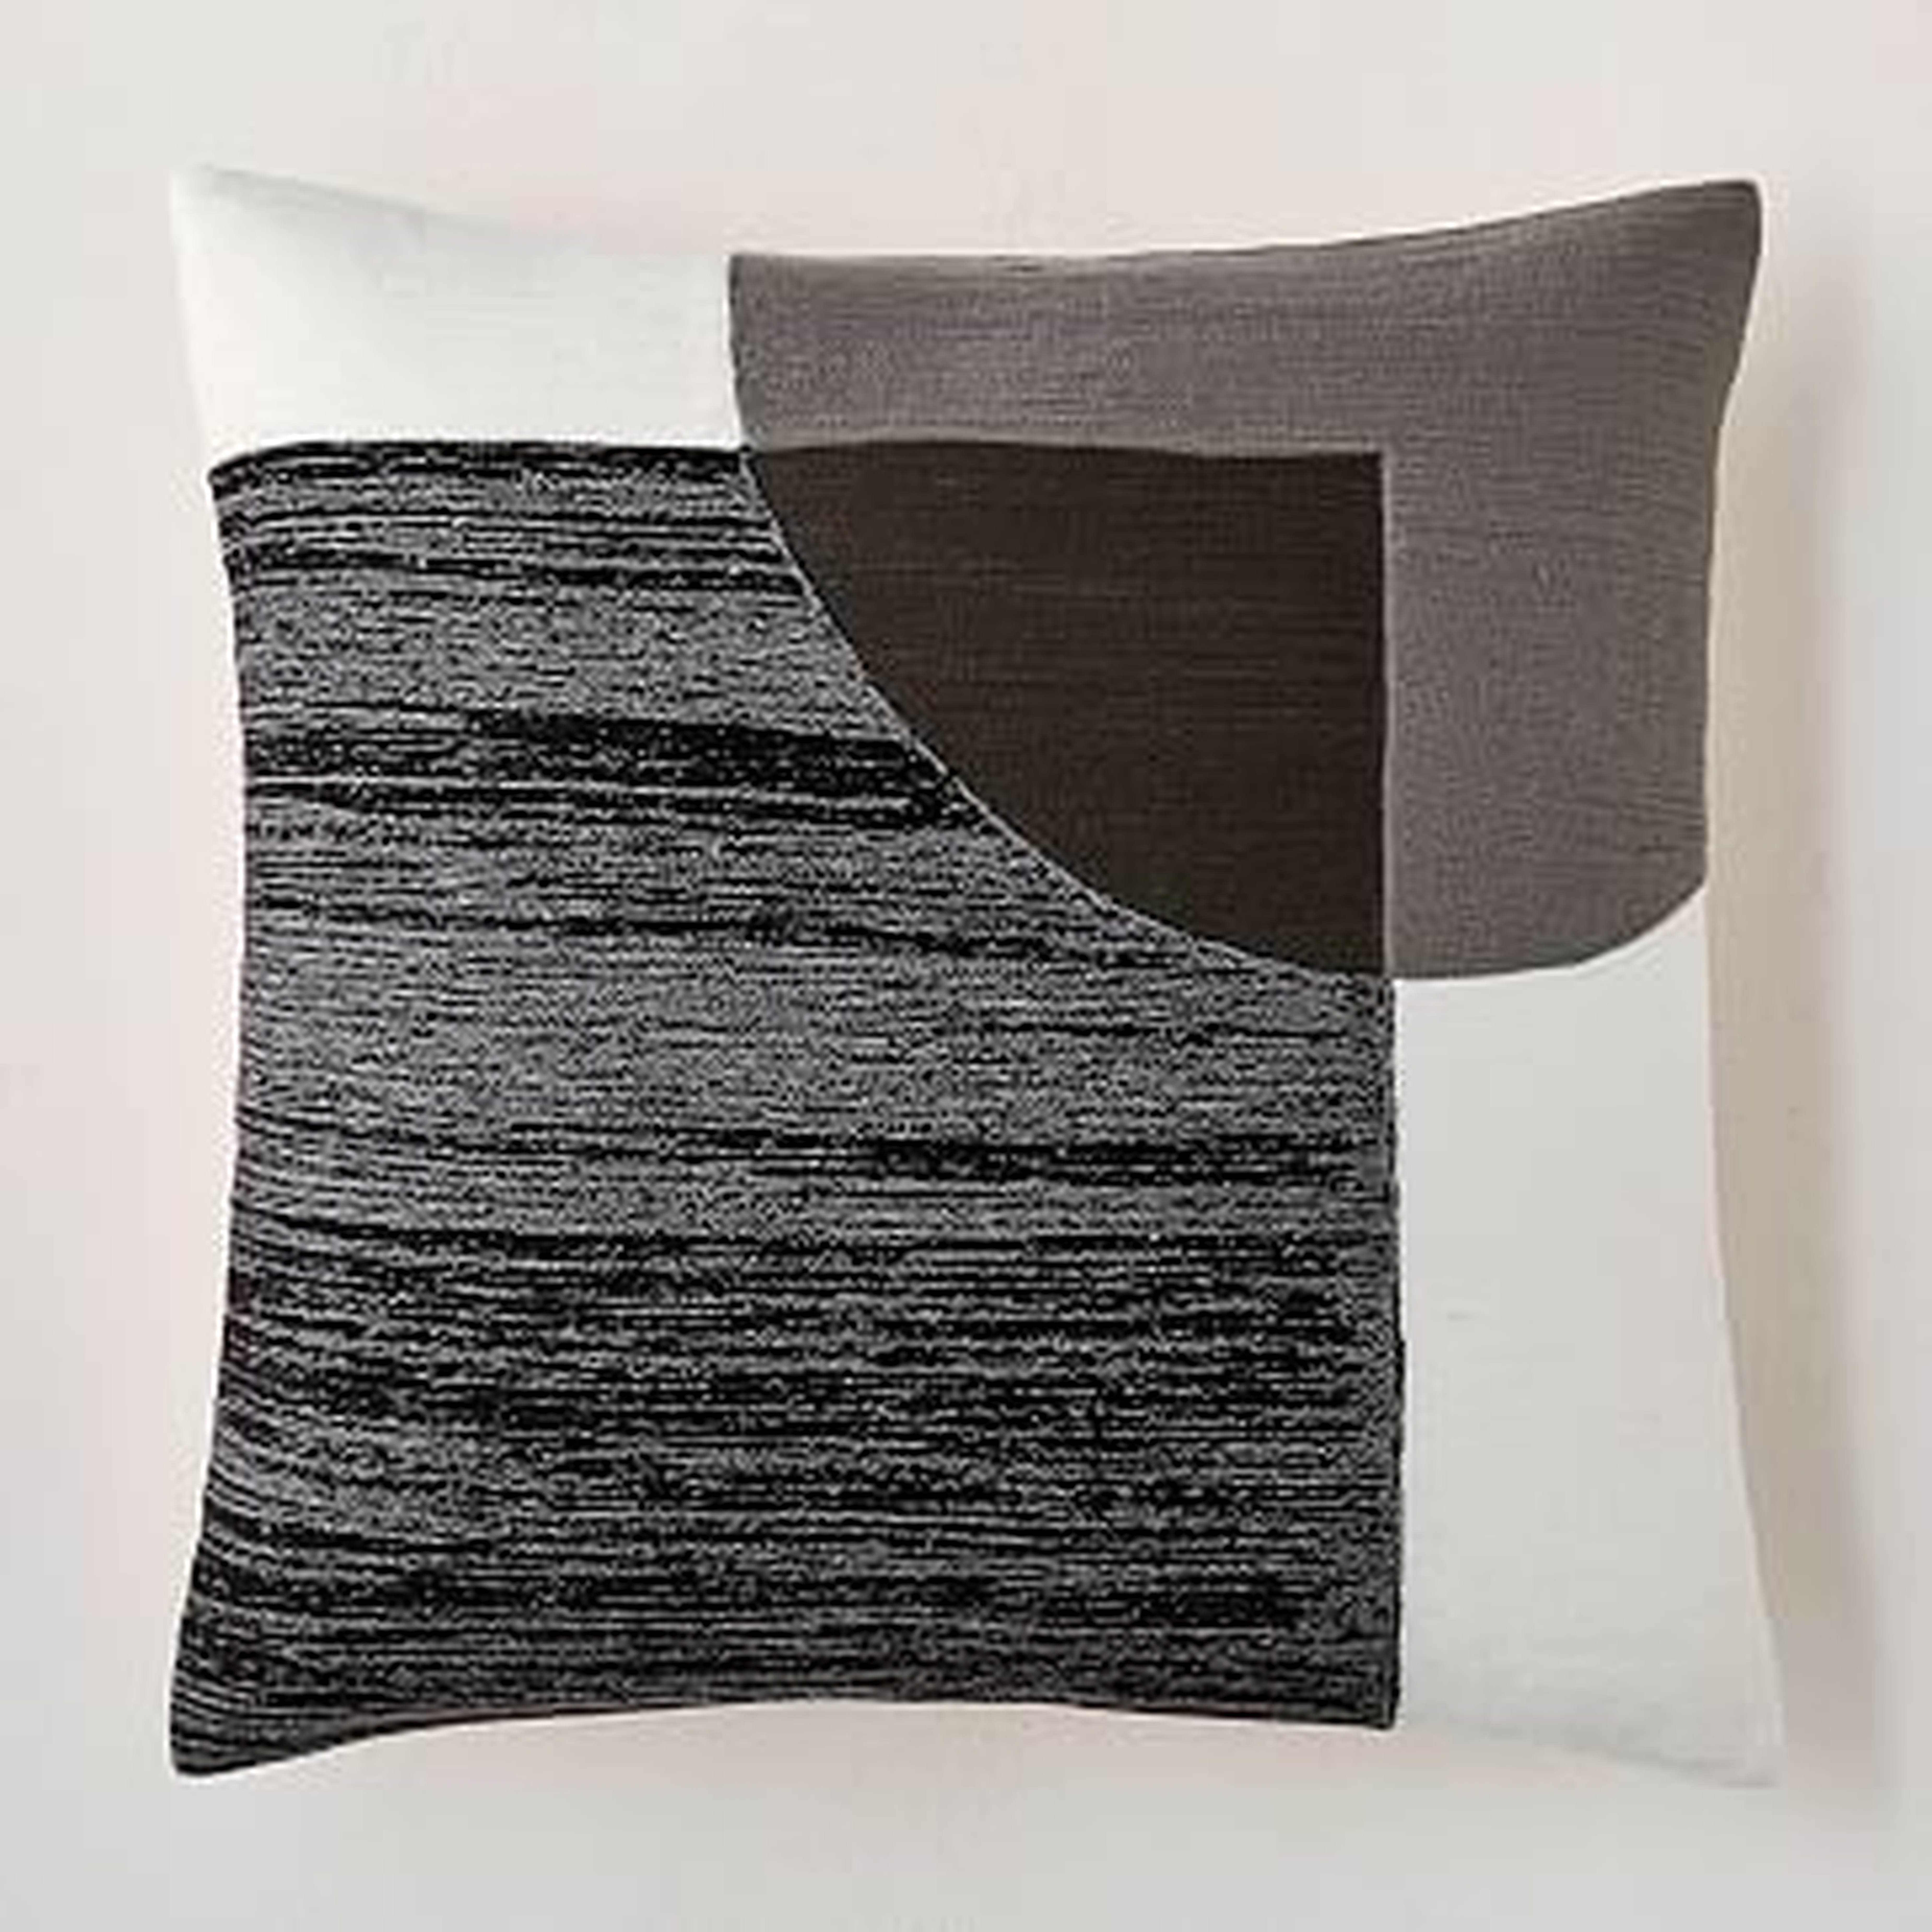 Crewel Overlapping Shapes Pillow Cover, Set Of 2, Black, 18"x18" - West Elm